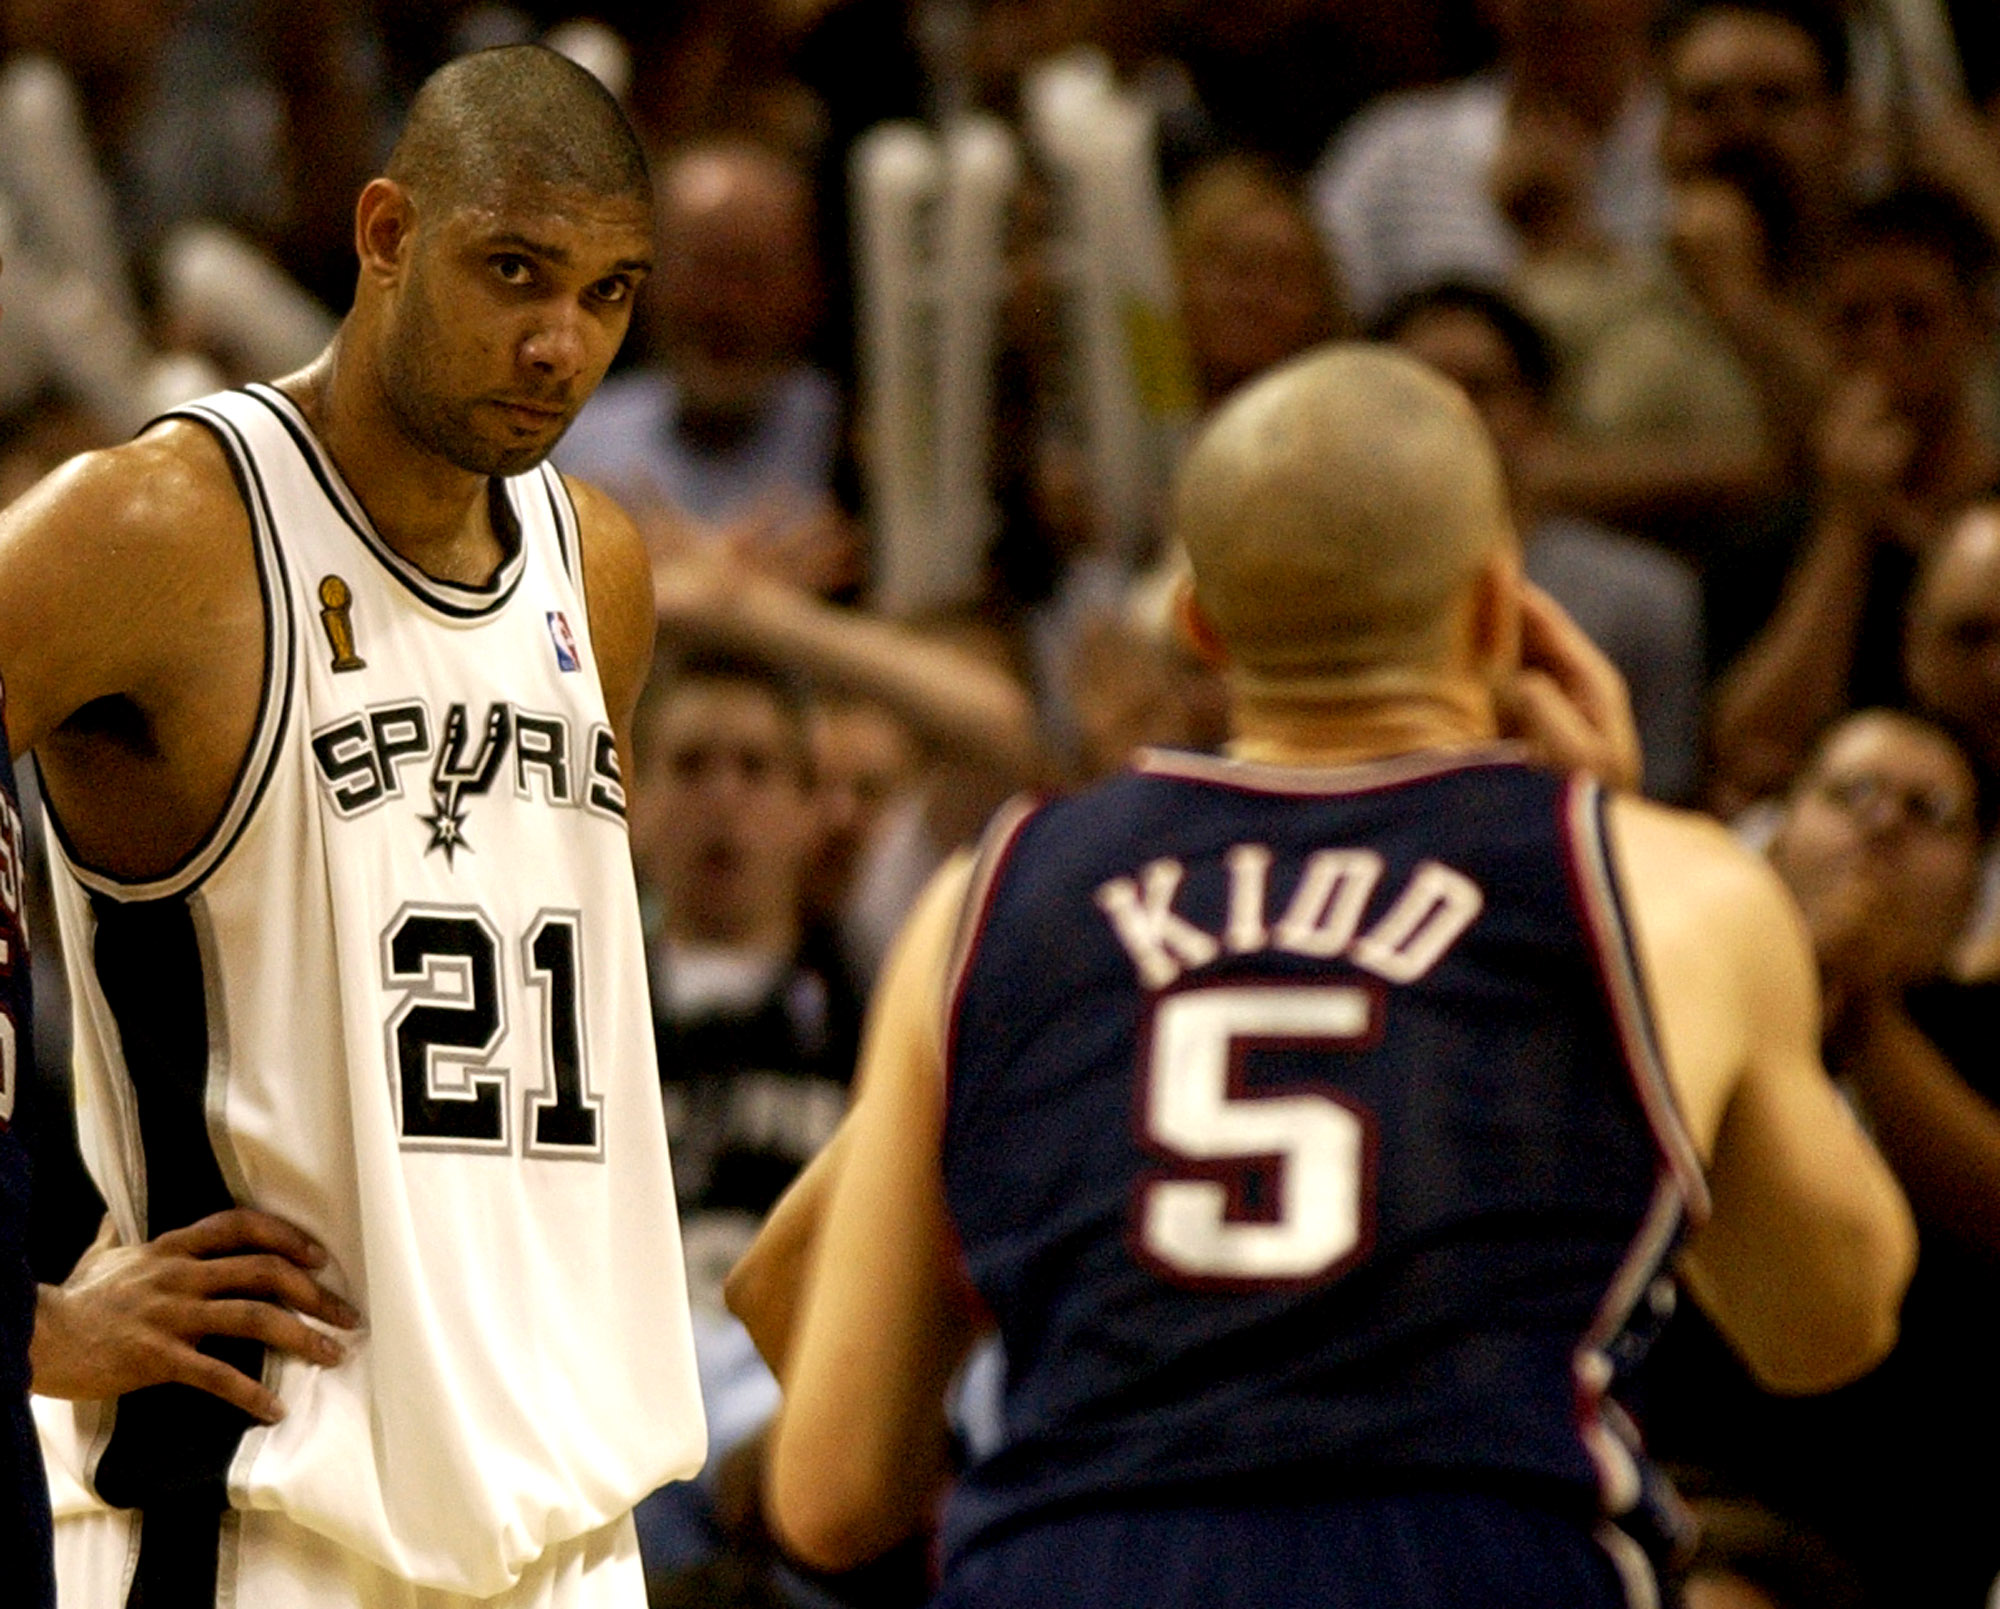 Tim Duncan staring at Jason Kidd while he is shooting a free throw.